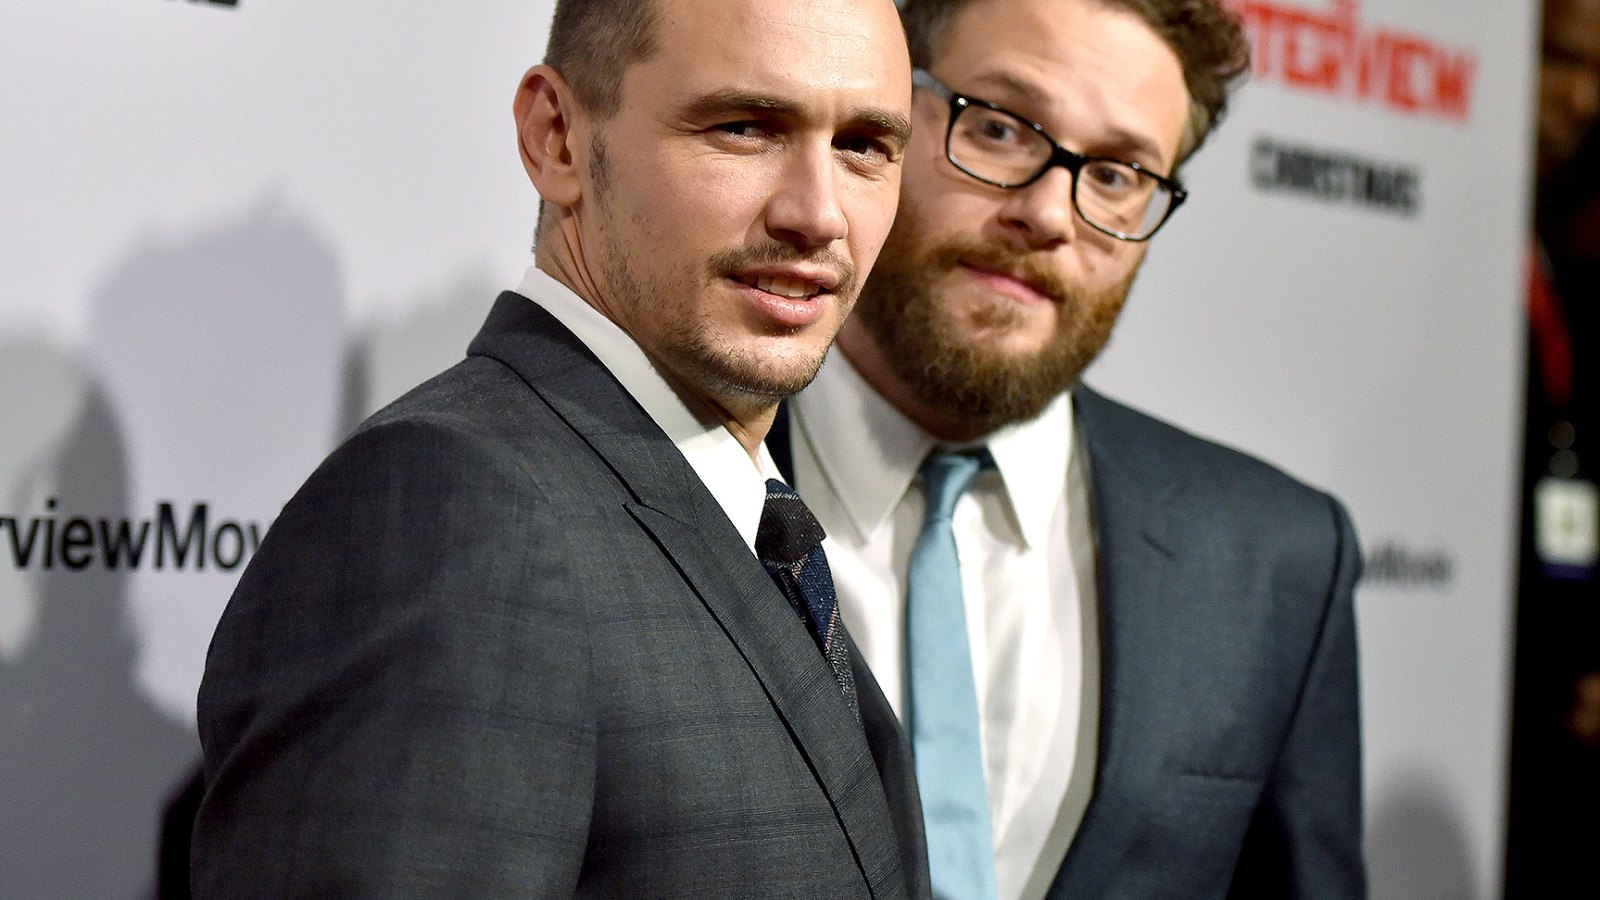 Seth Rogen and James Franco's movie, The Interview, has had its NYC pr